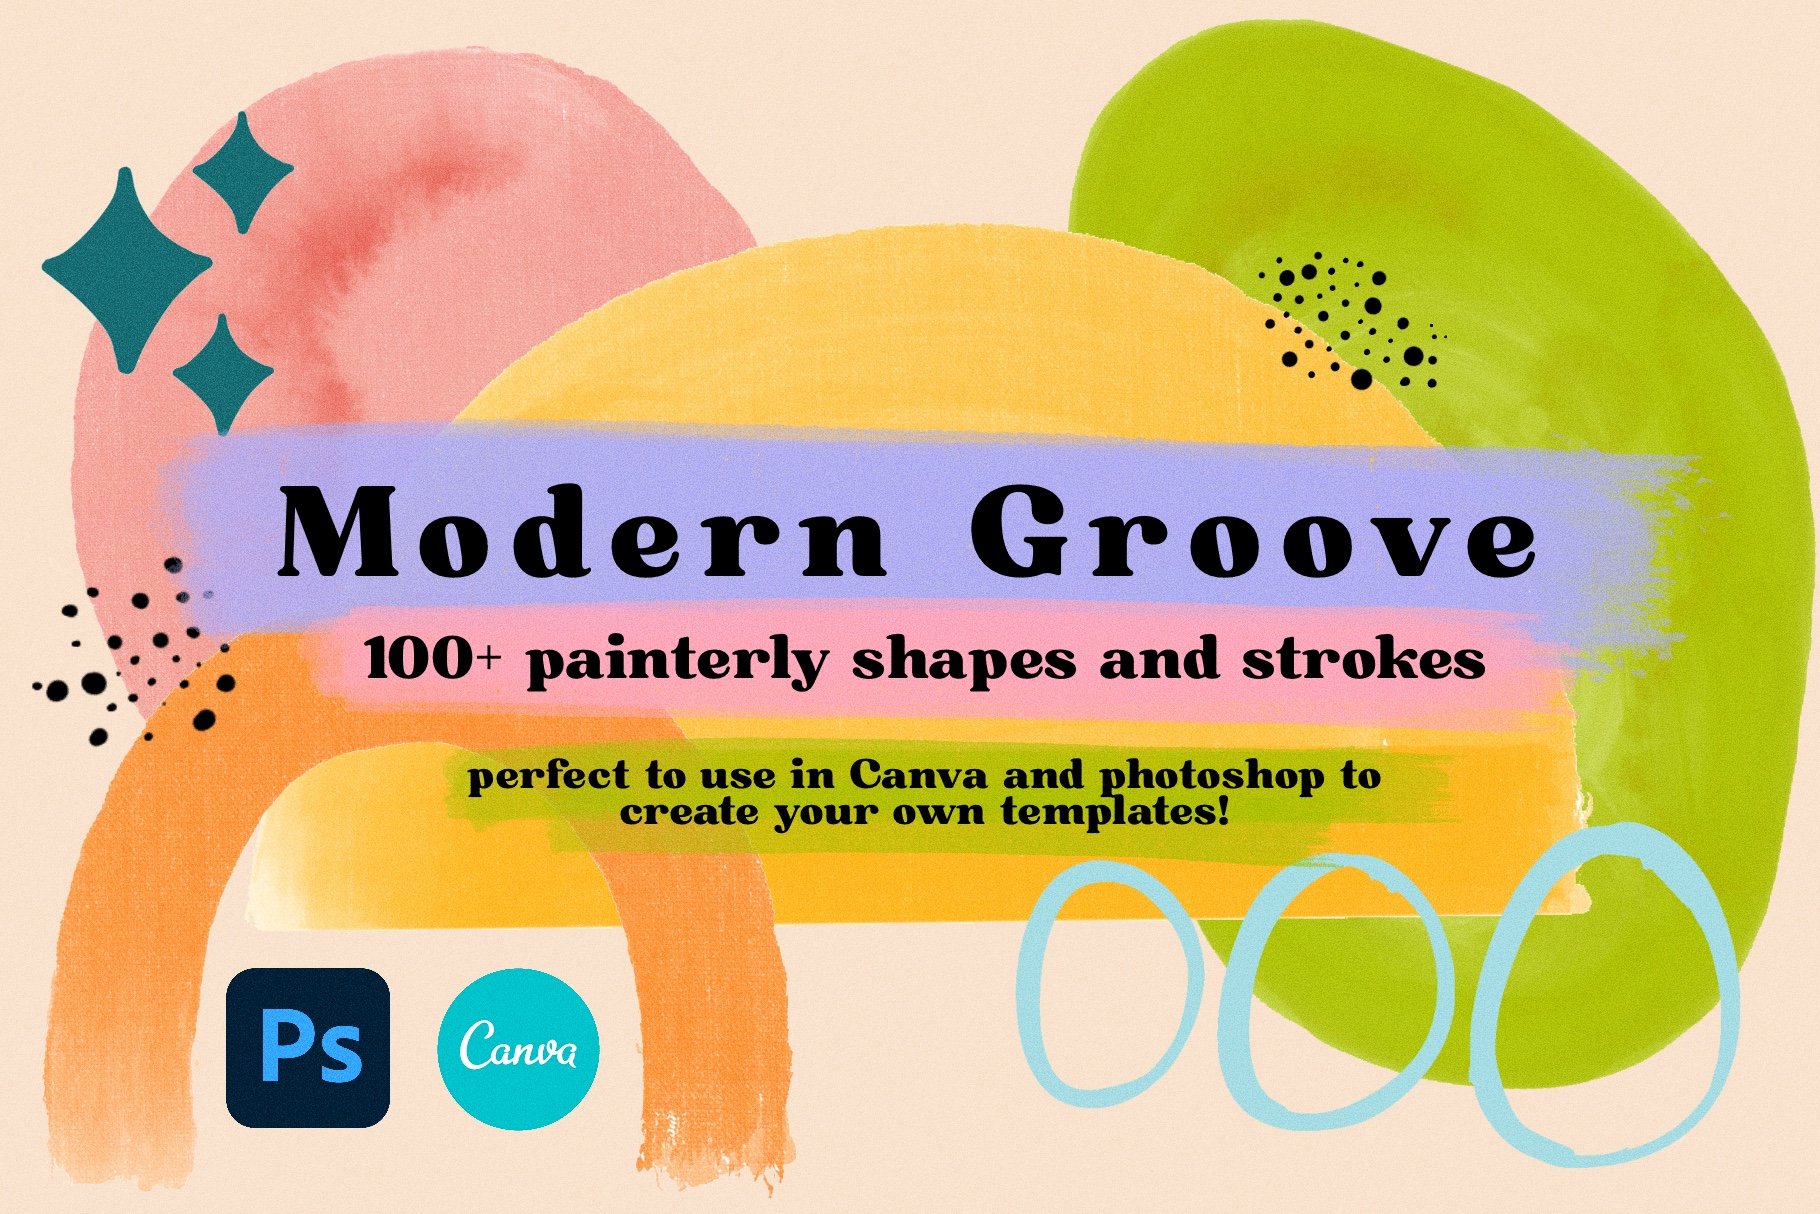 Modern Groove Shapes and Strokescover image.